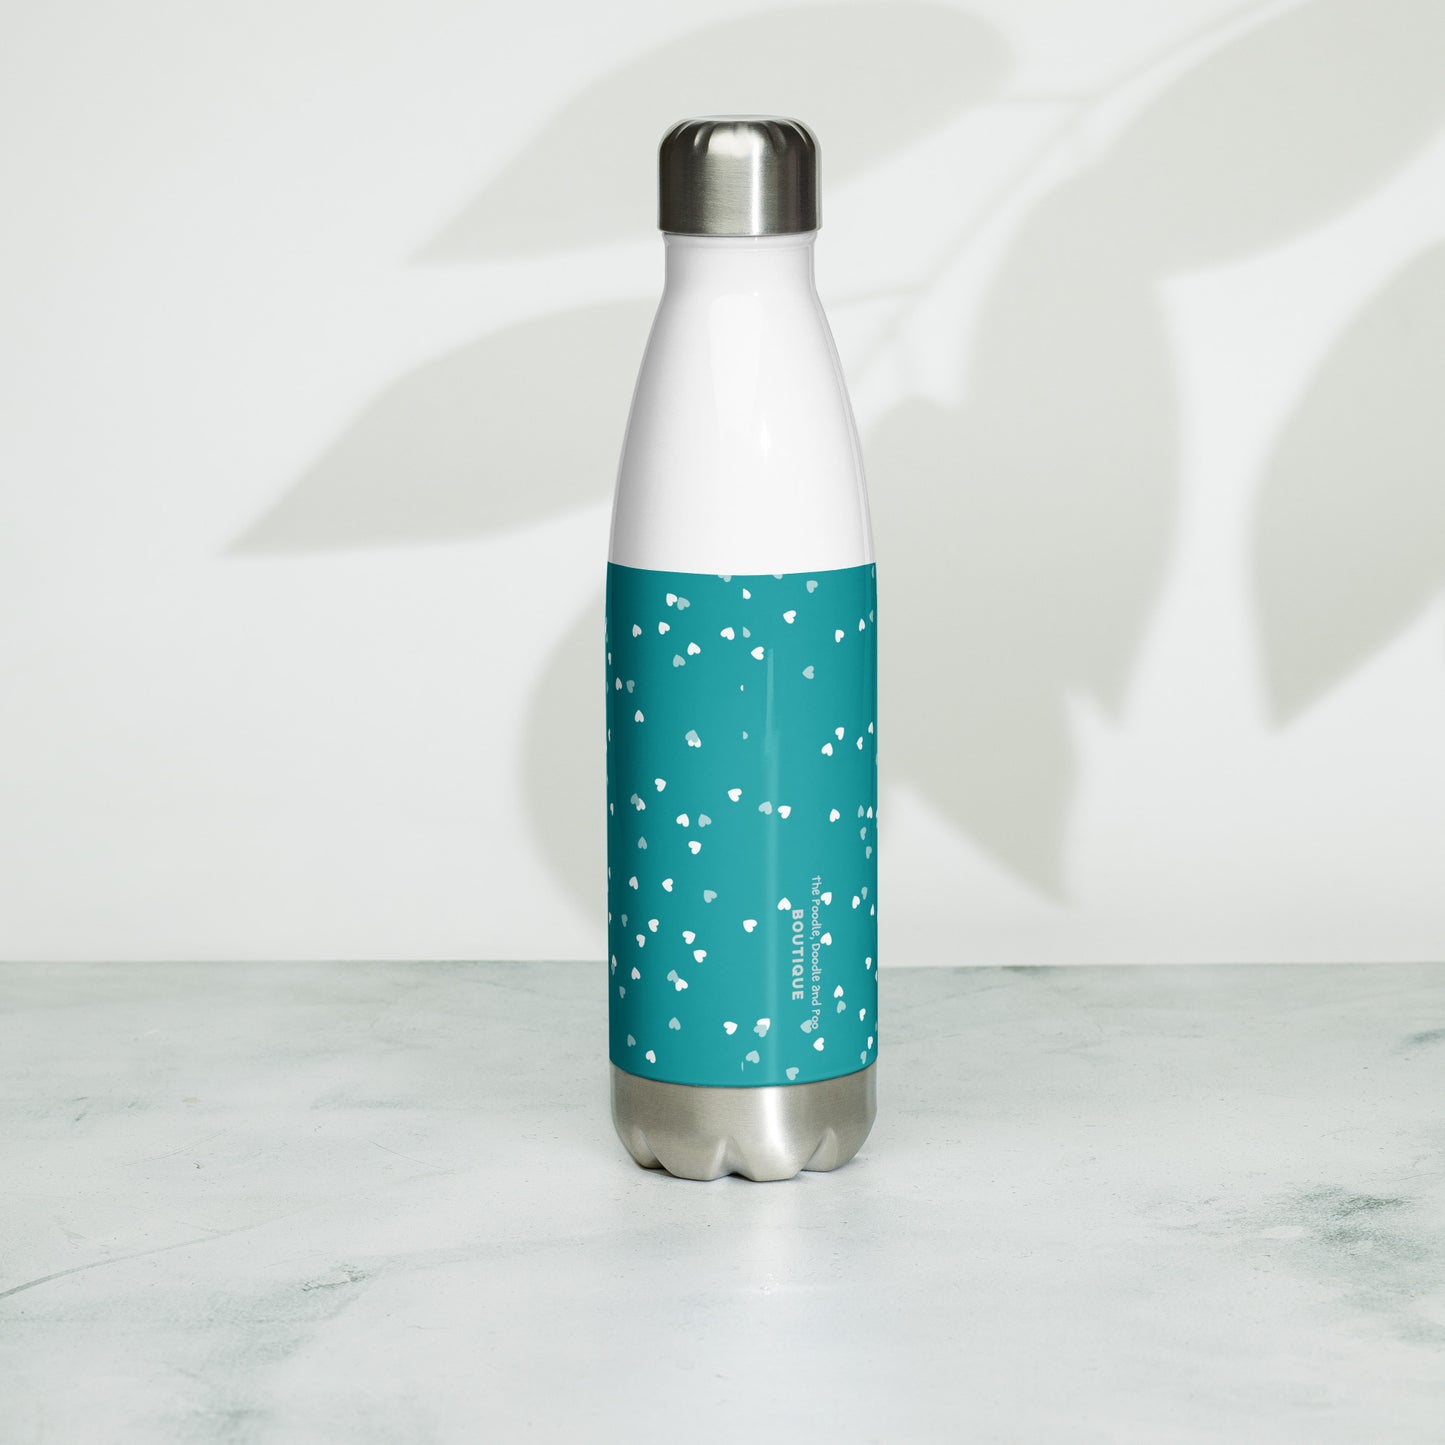 "Love" Stainless steel water bottle in teal - apricot Poochon